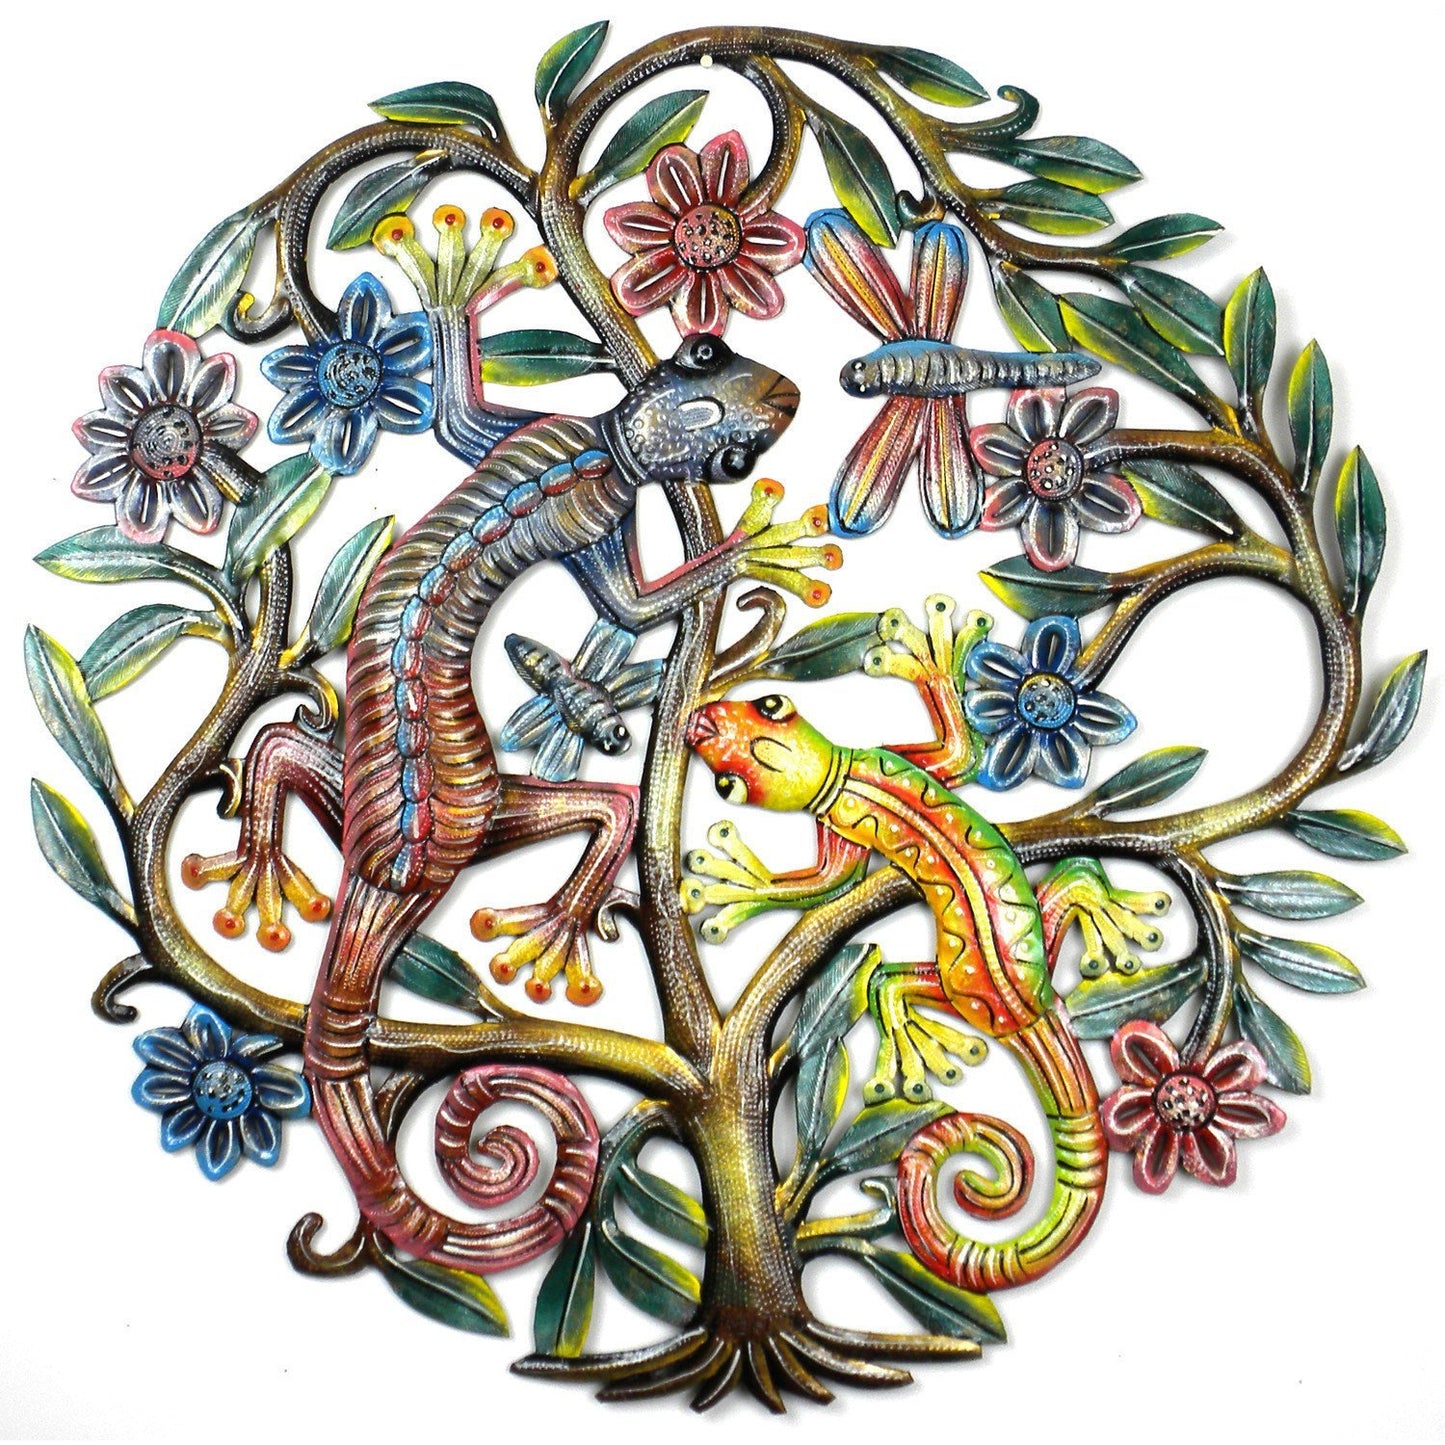 Painted Gecko Tree of Life Steel Drum Wall Art, 24" - Croix des Bouquets